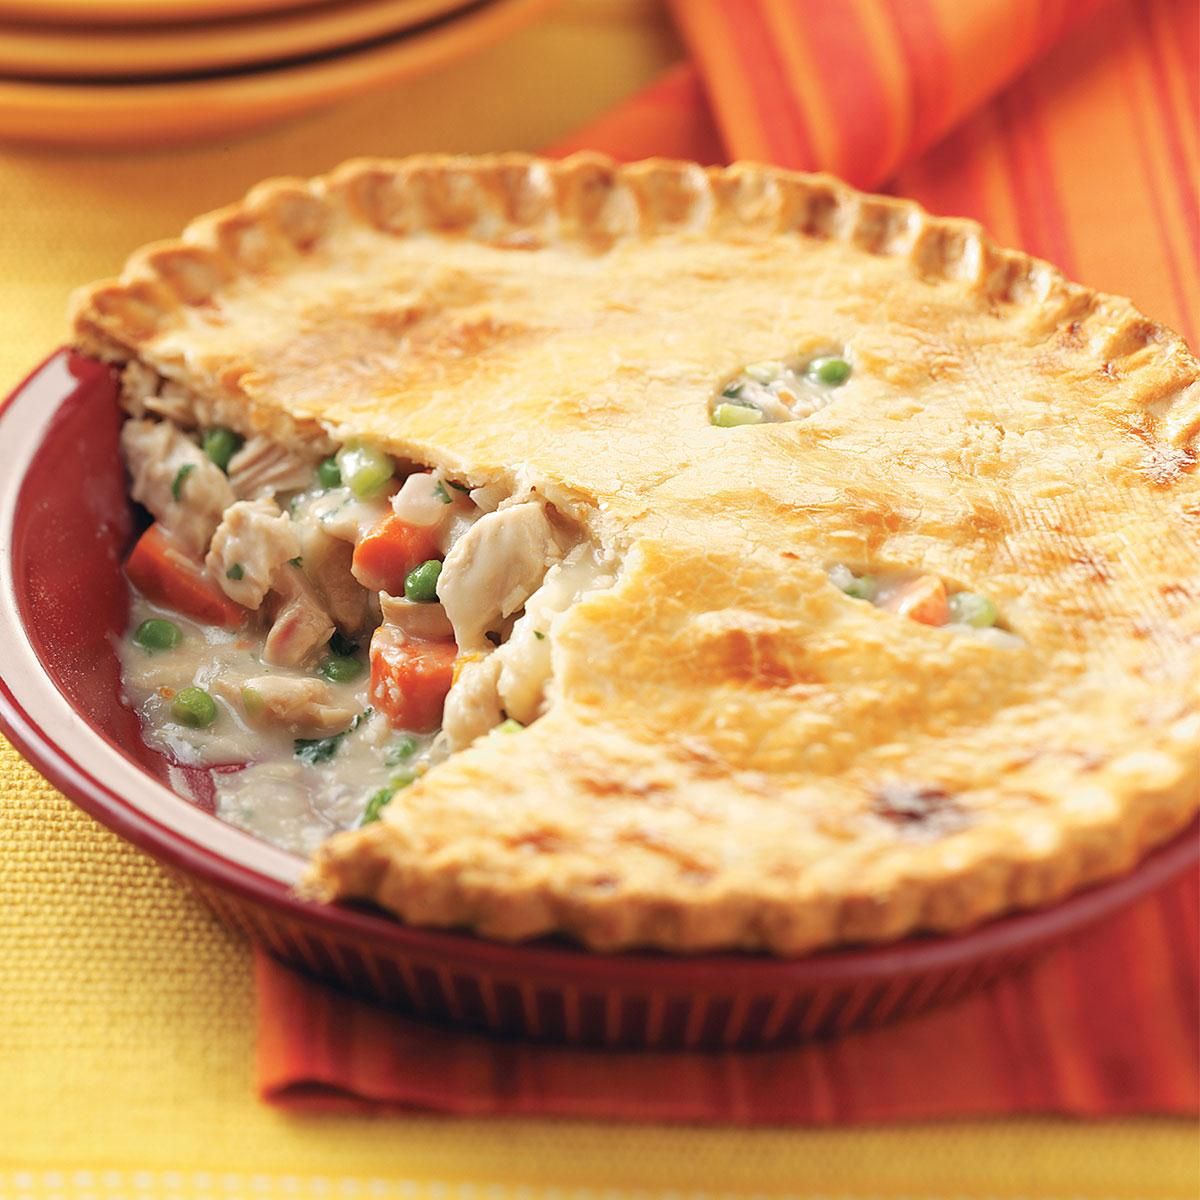 Turkey Pot Pie Recipe With Canned Vegetables